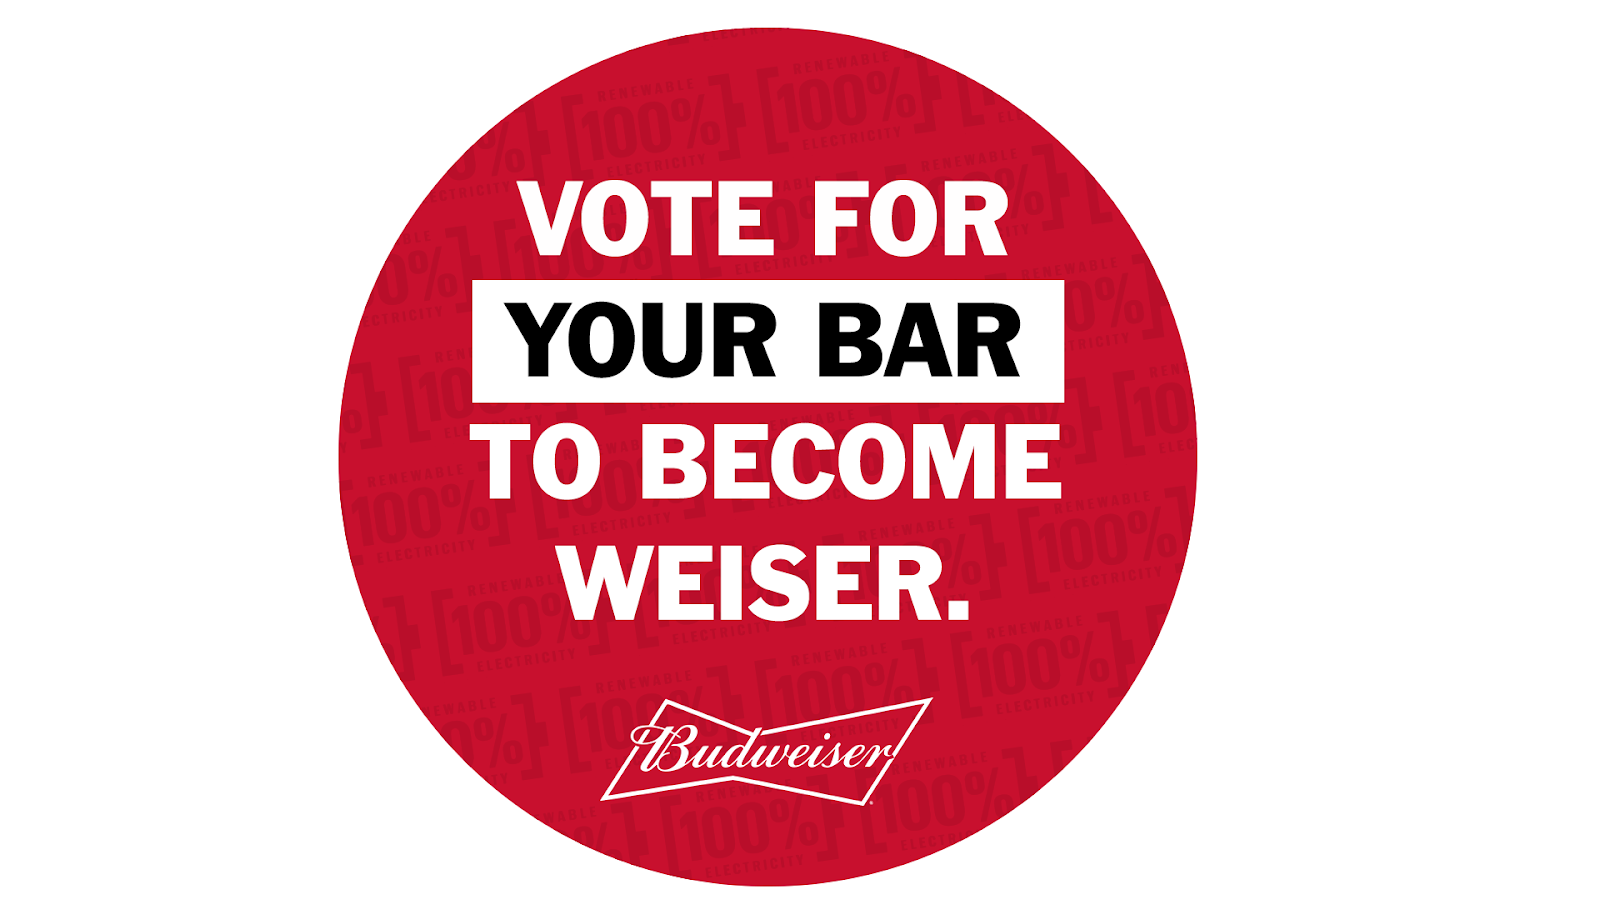 Signage encouraging people to vote for their bar to become weiser, as part of Budweiser's Clio Winning Belgian case campaign